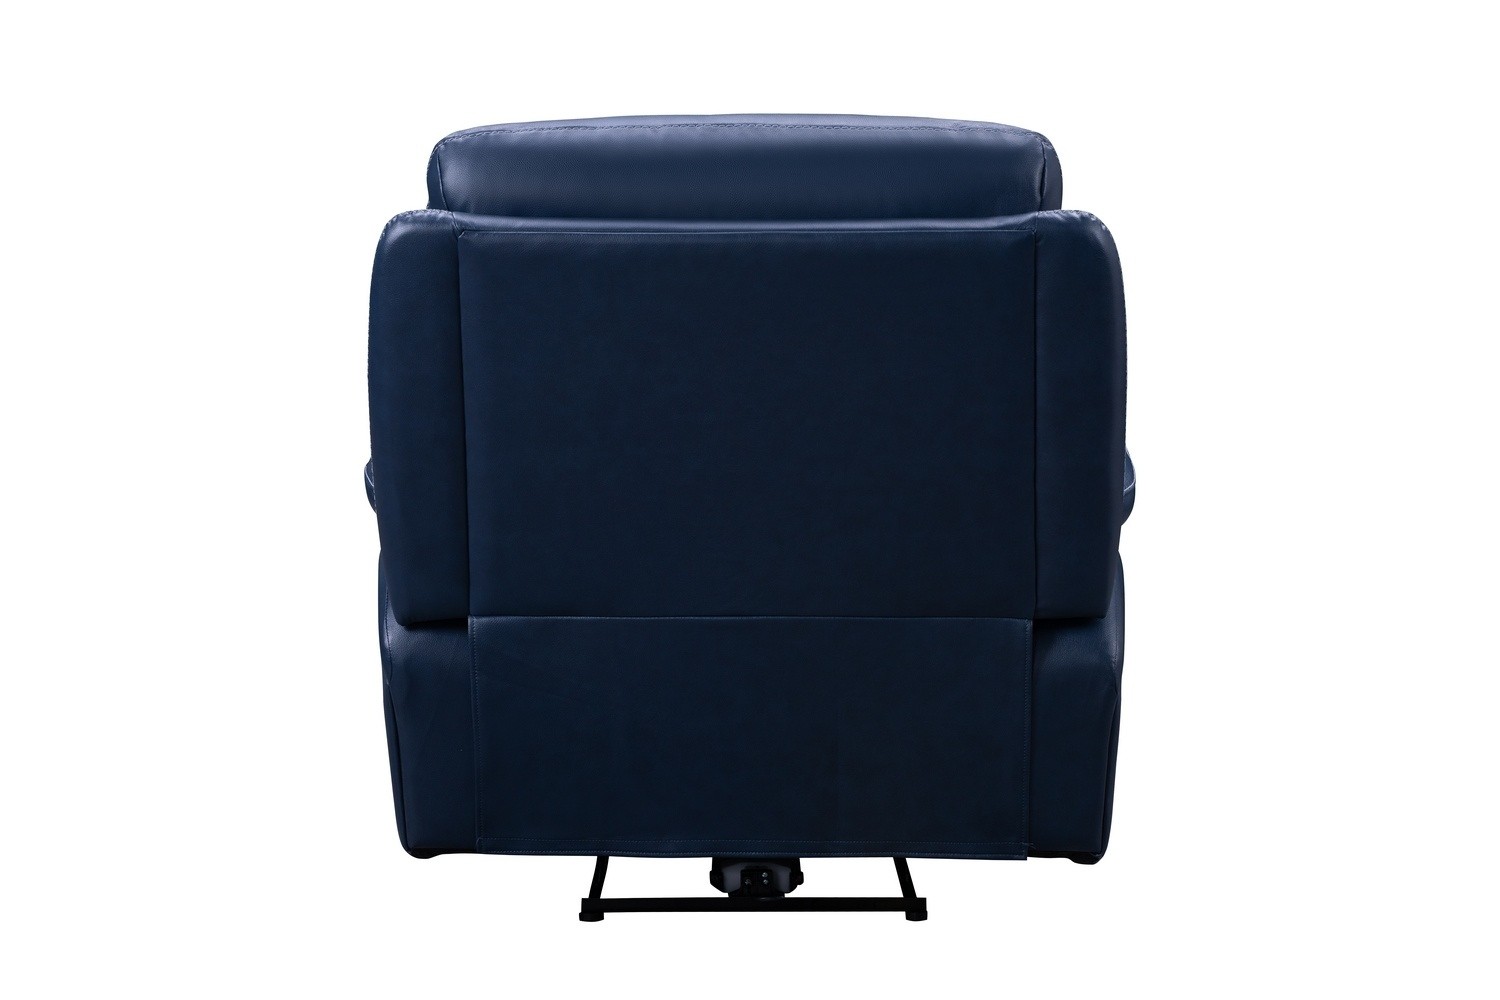 Barcalounger Micah Power Recliner Chair with Power Head Rest - Marco Navy Blue/Leather Match